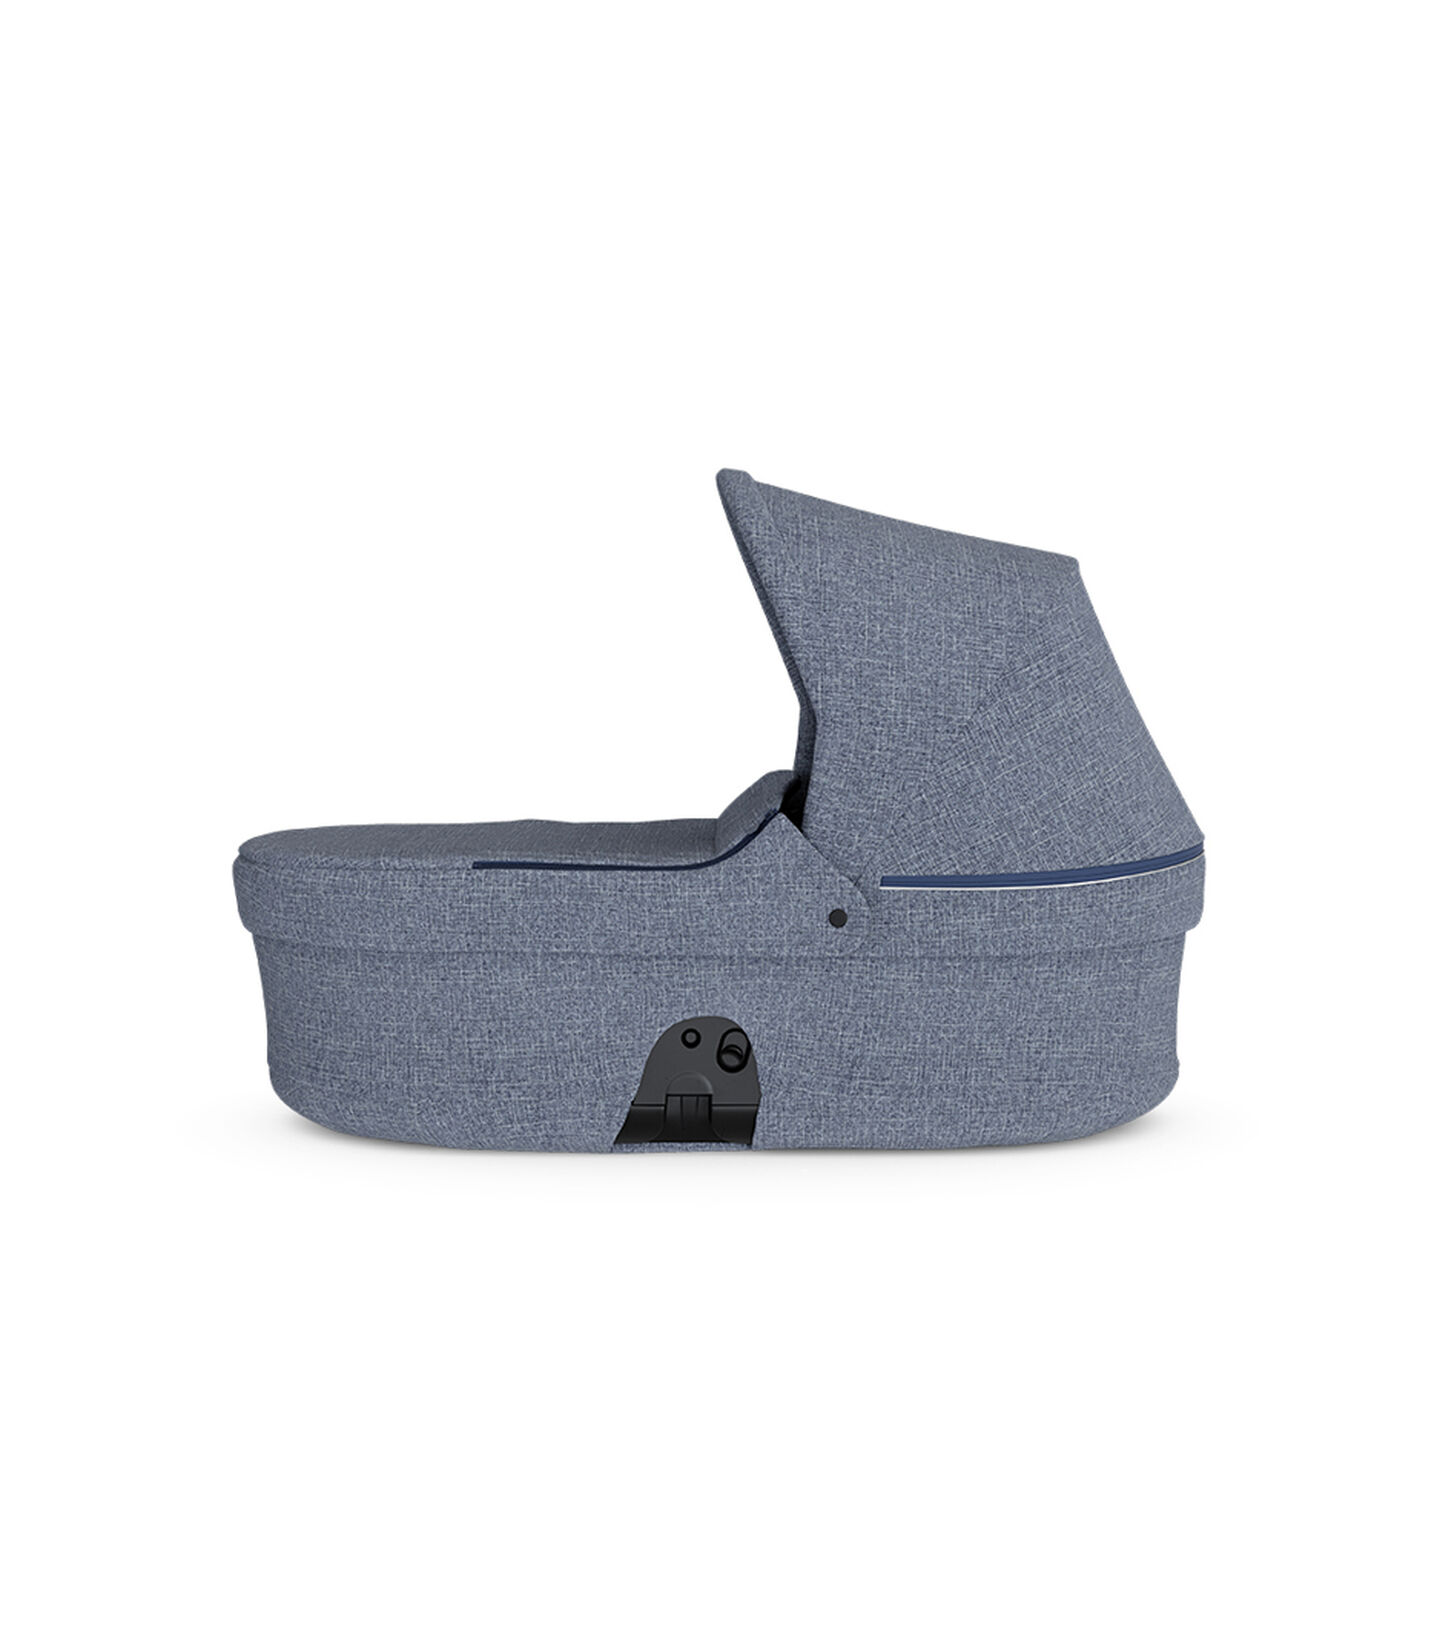 Stokke® Beat Carry Cot Blue Melange, 藍麻色, mainview view 2